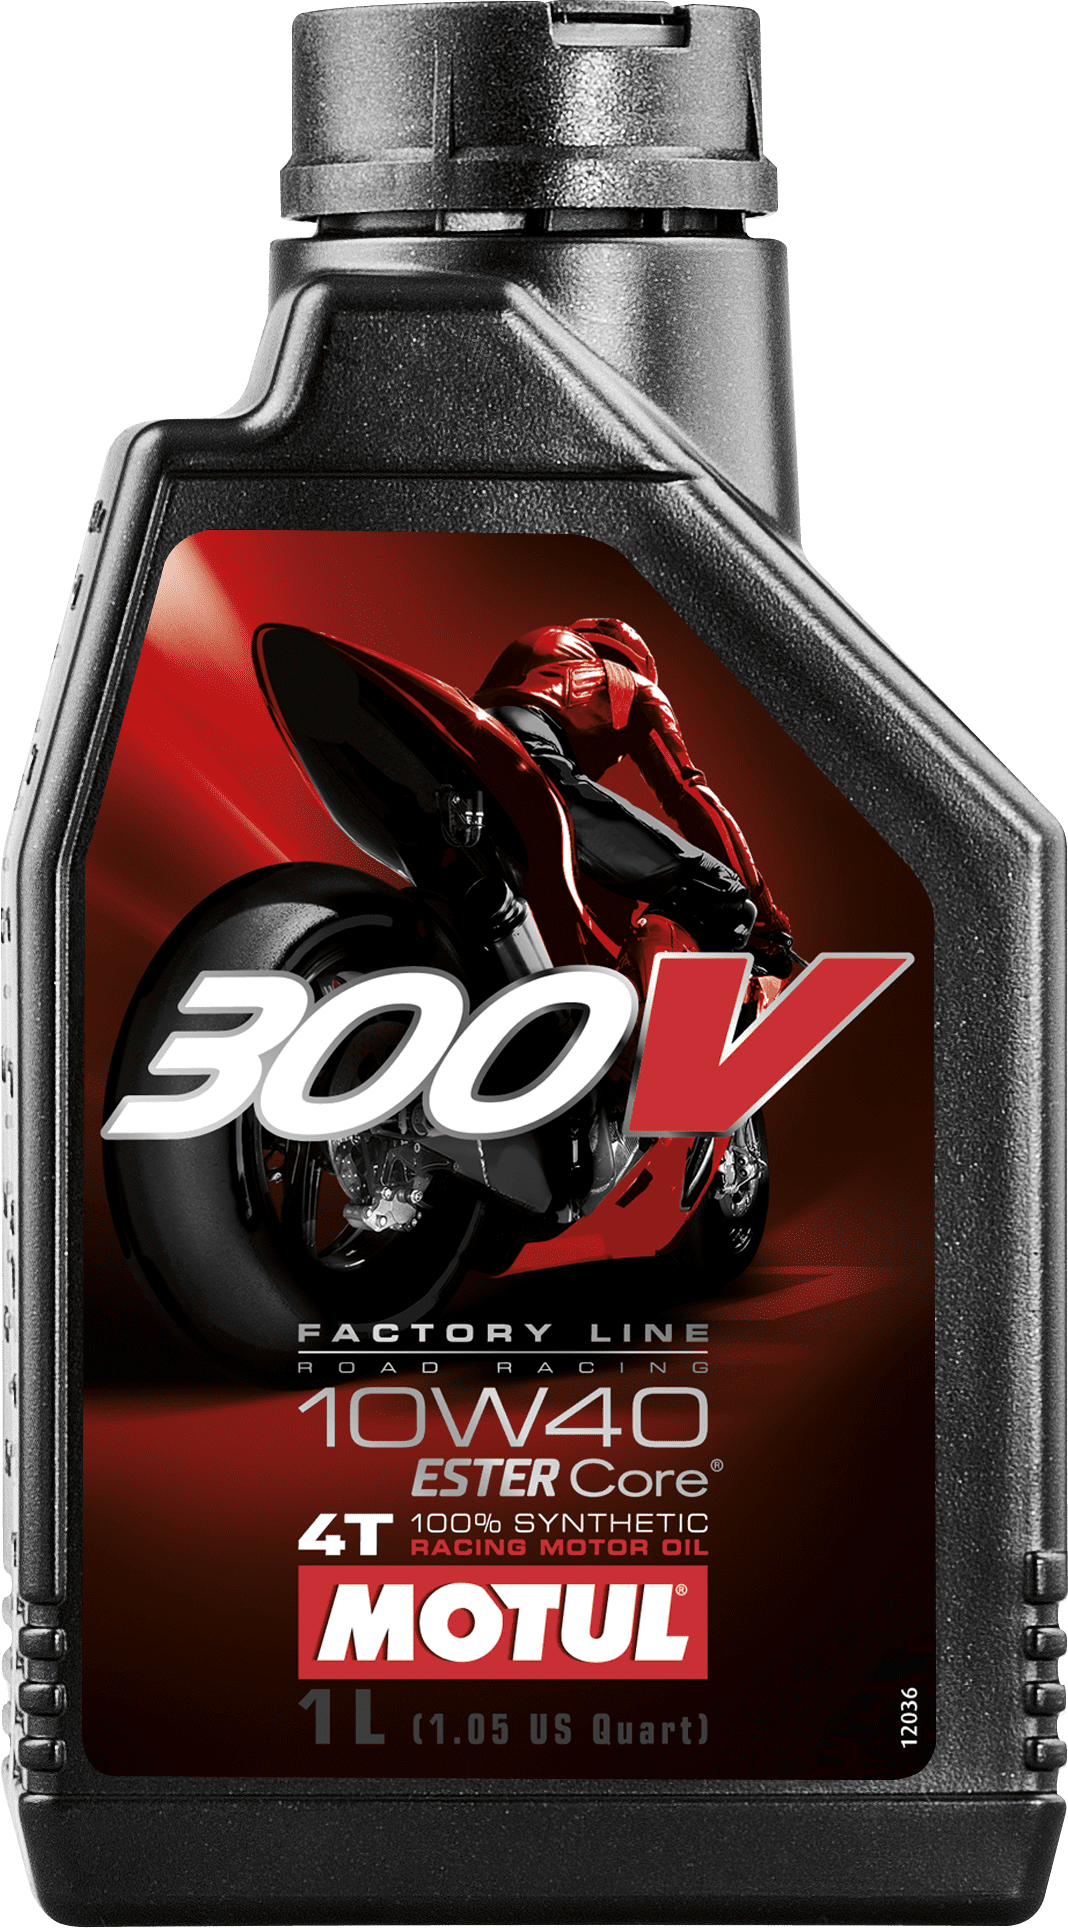 104118-1 100% Synthetic racing motor oil. Based on ESTER Core® technology and above all existing motorsport standards.